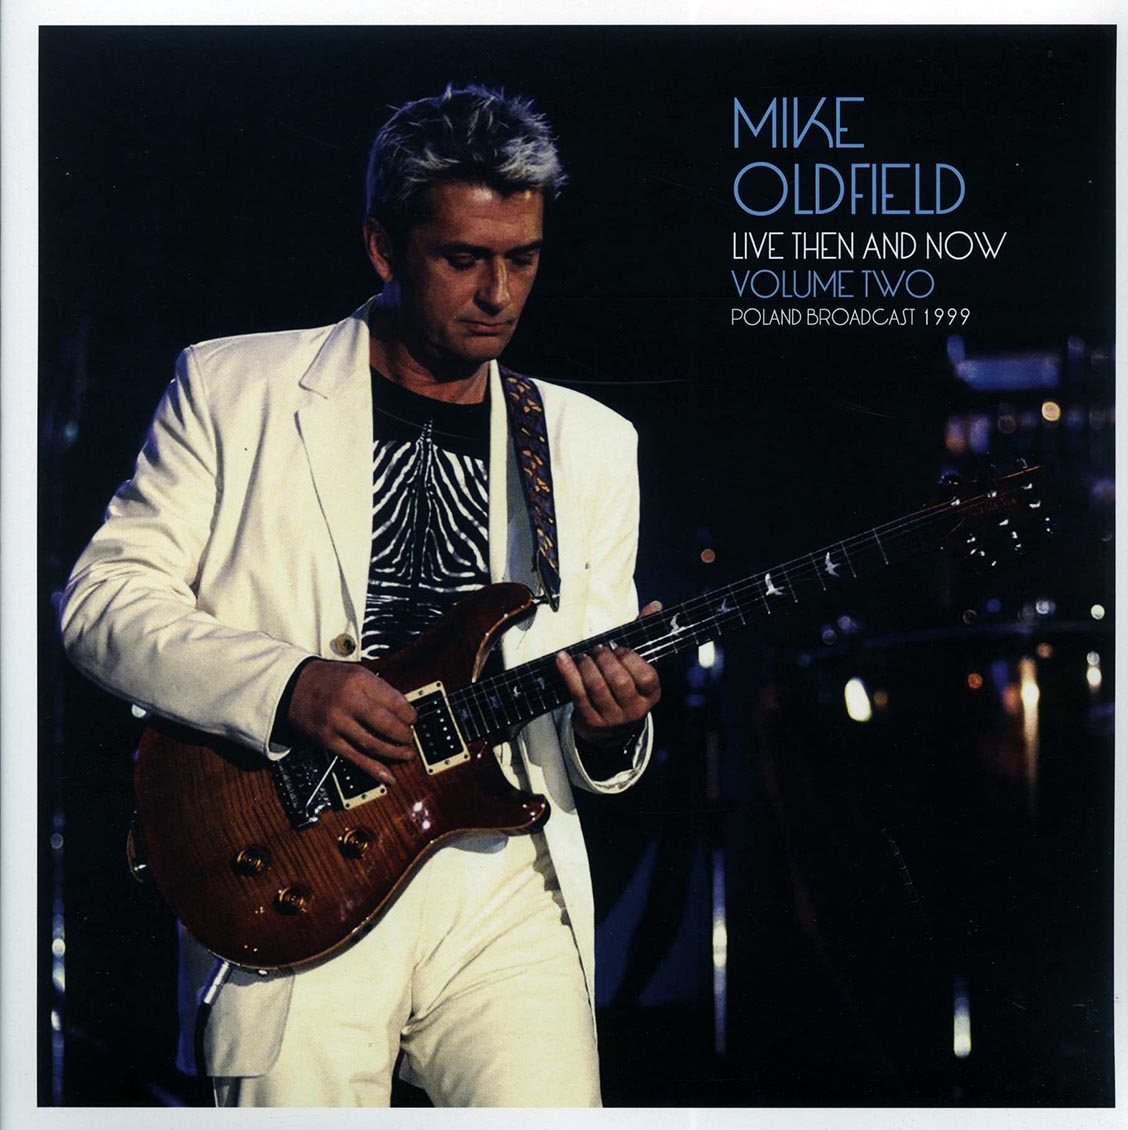 Mike Oldfield - Live Then & Now Volume 2: Poland Broadcast 1999